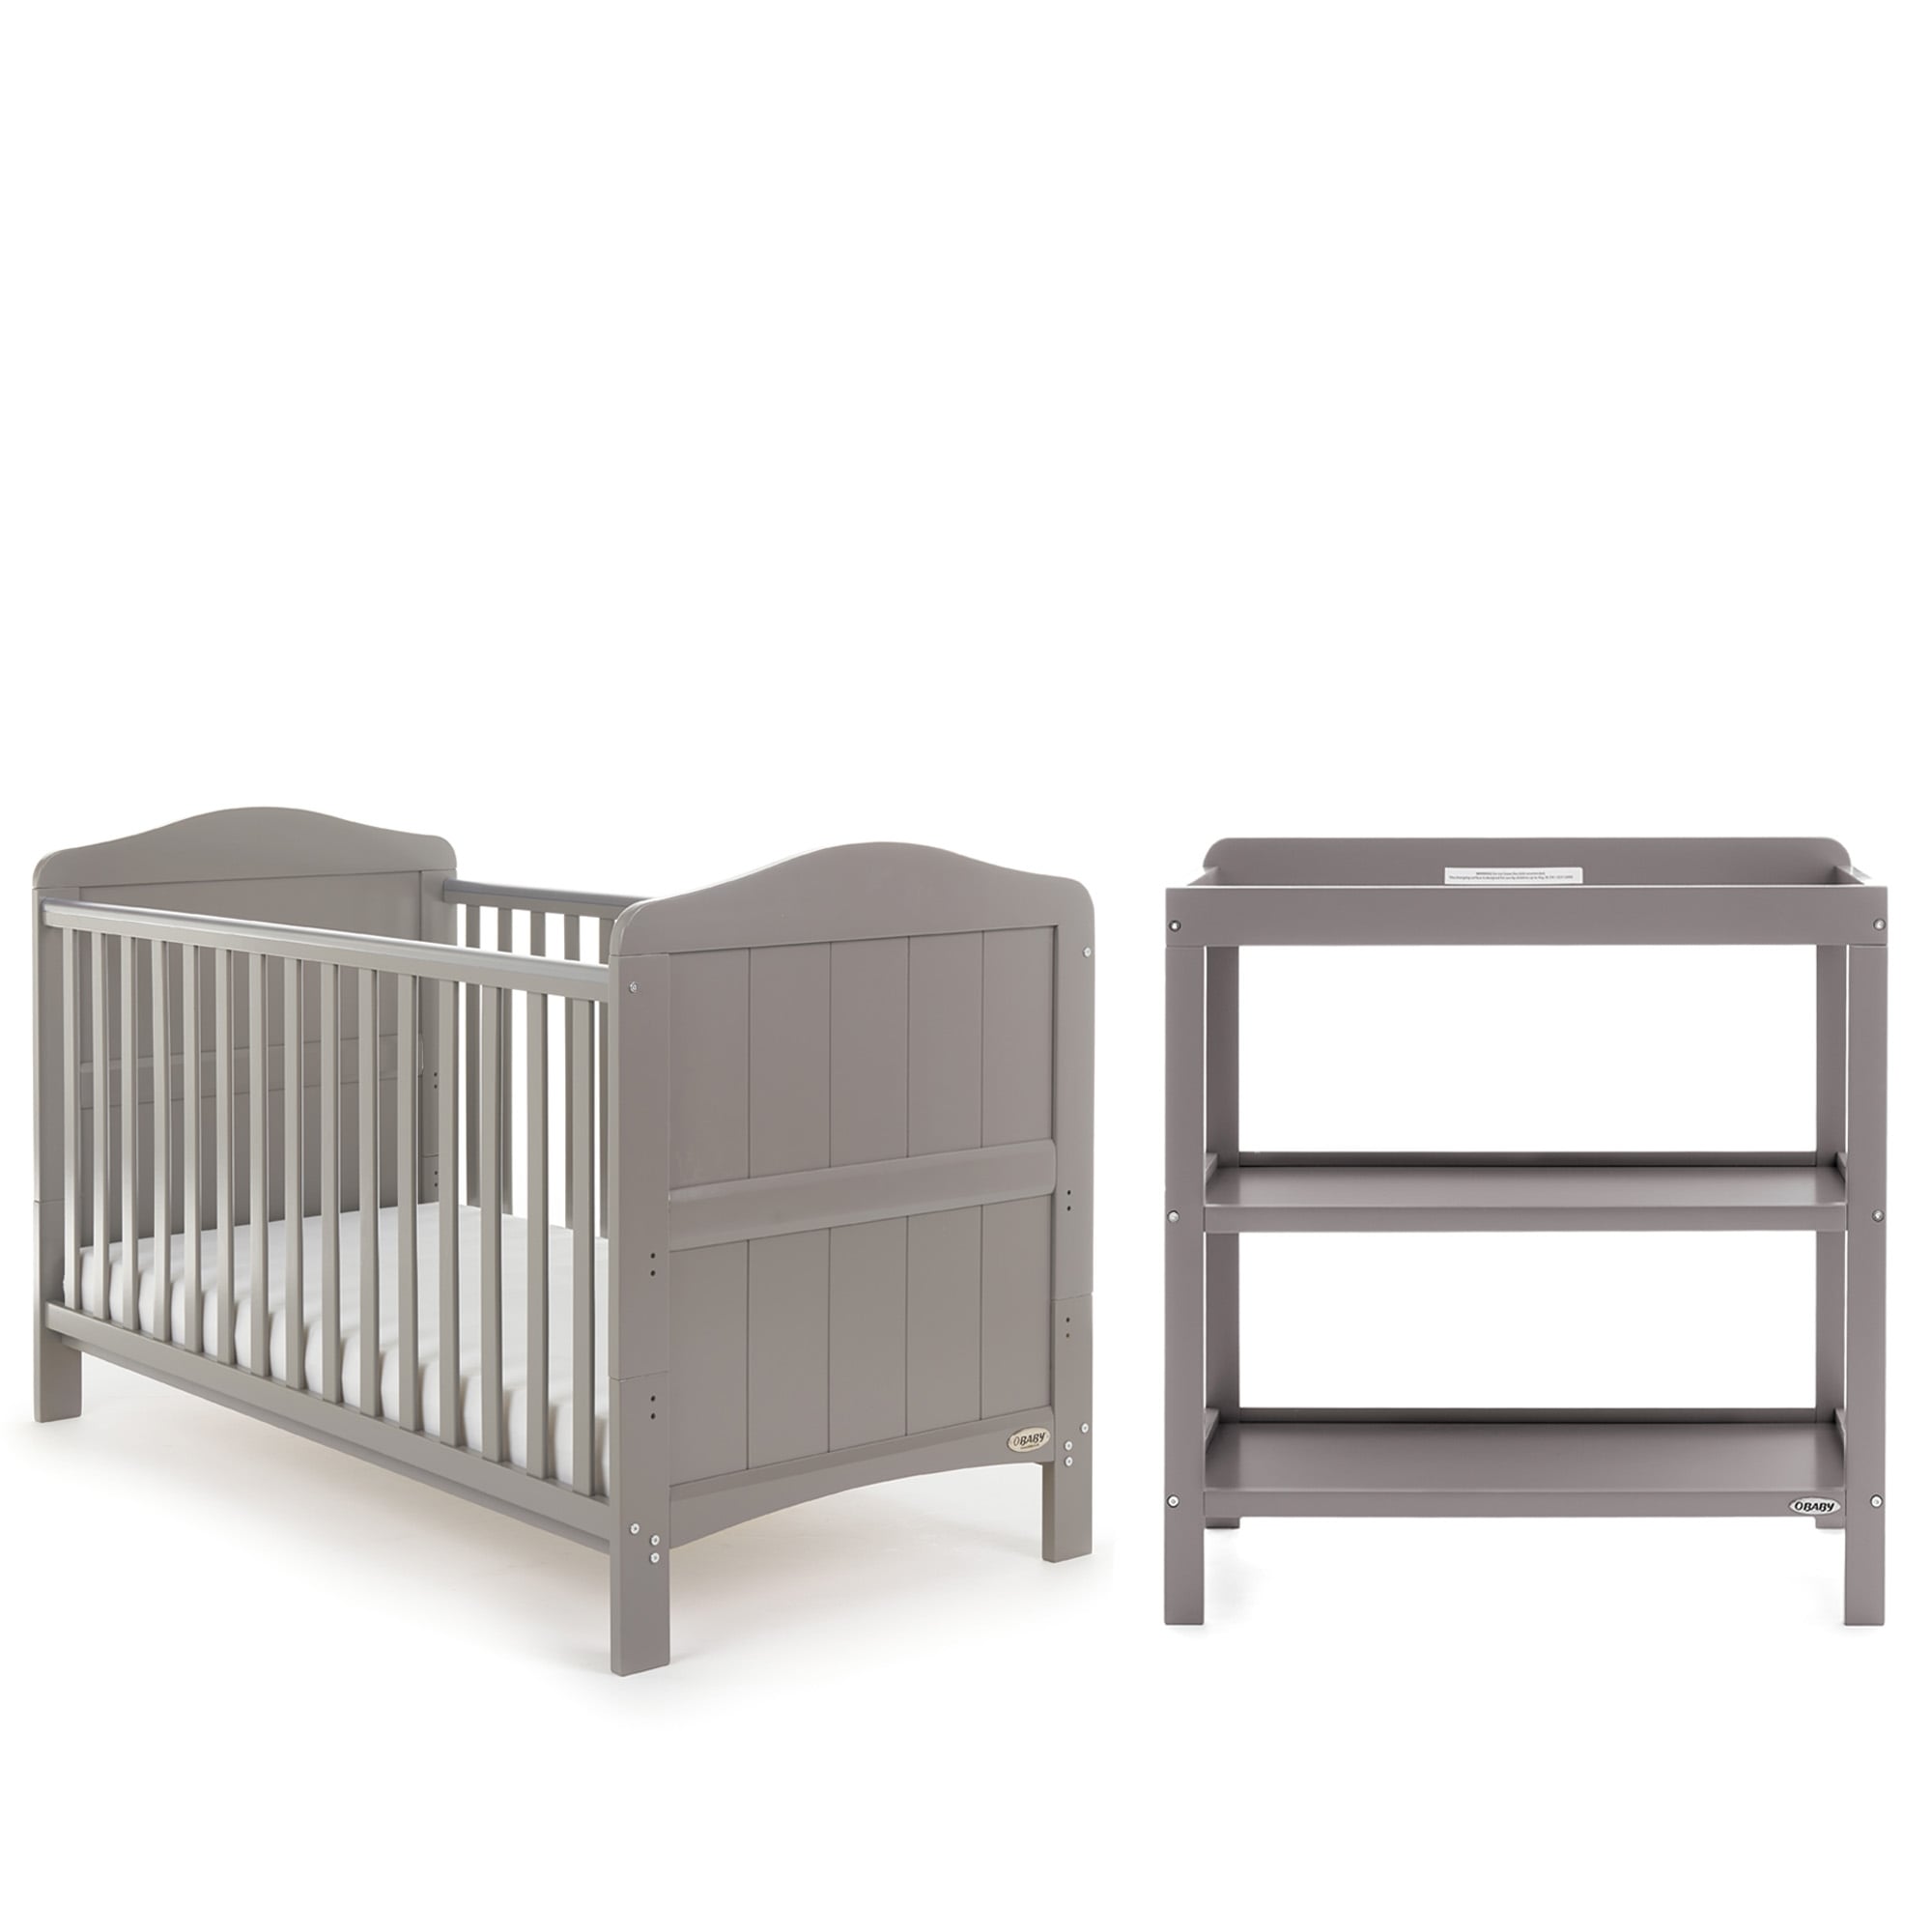 Obaby Whitby 2 Piece Nursery Furniture Room Set - Taupe Grey